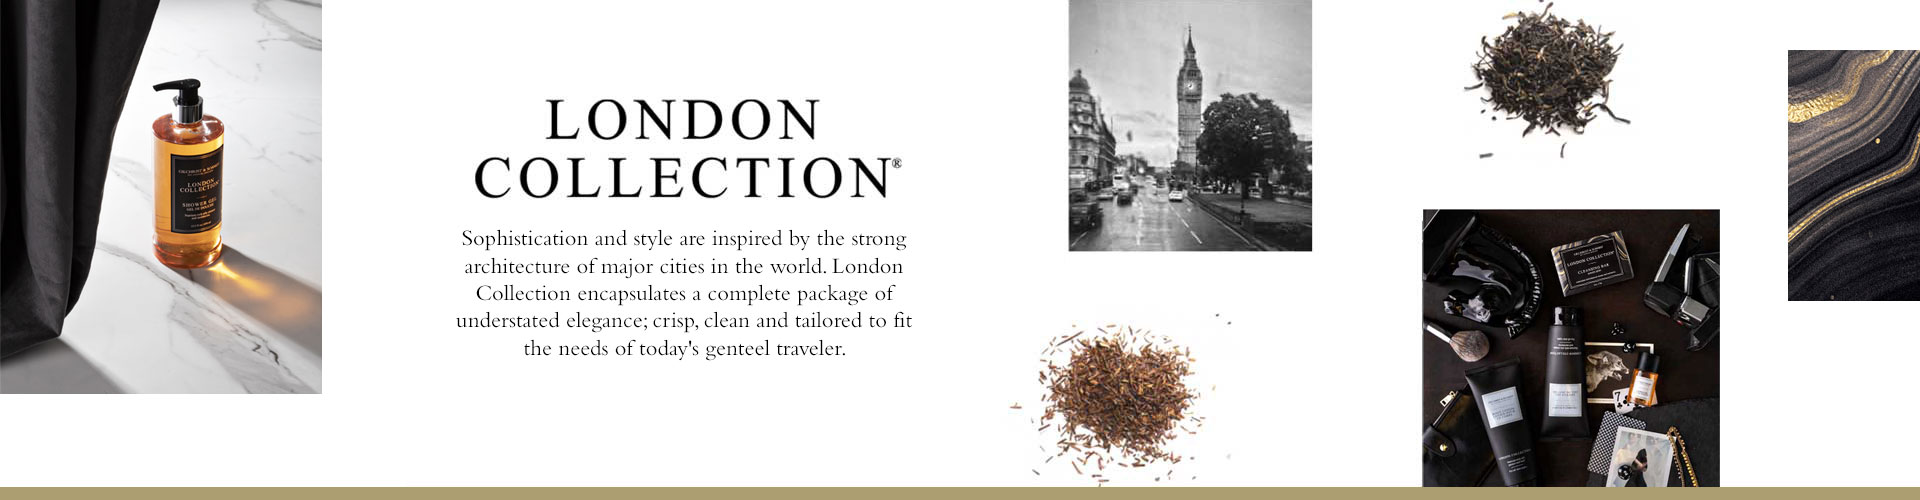 London Collection®